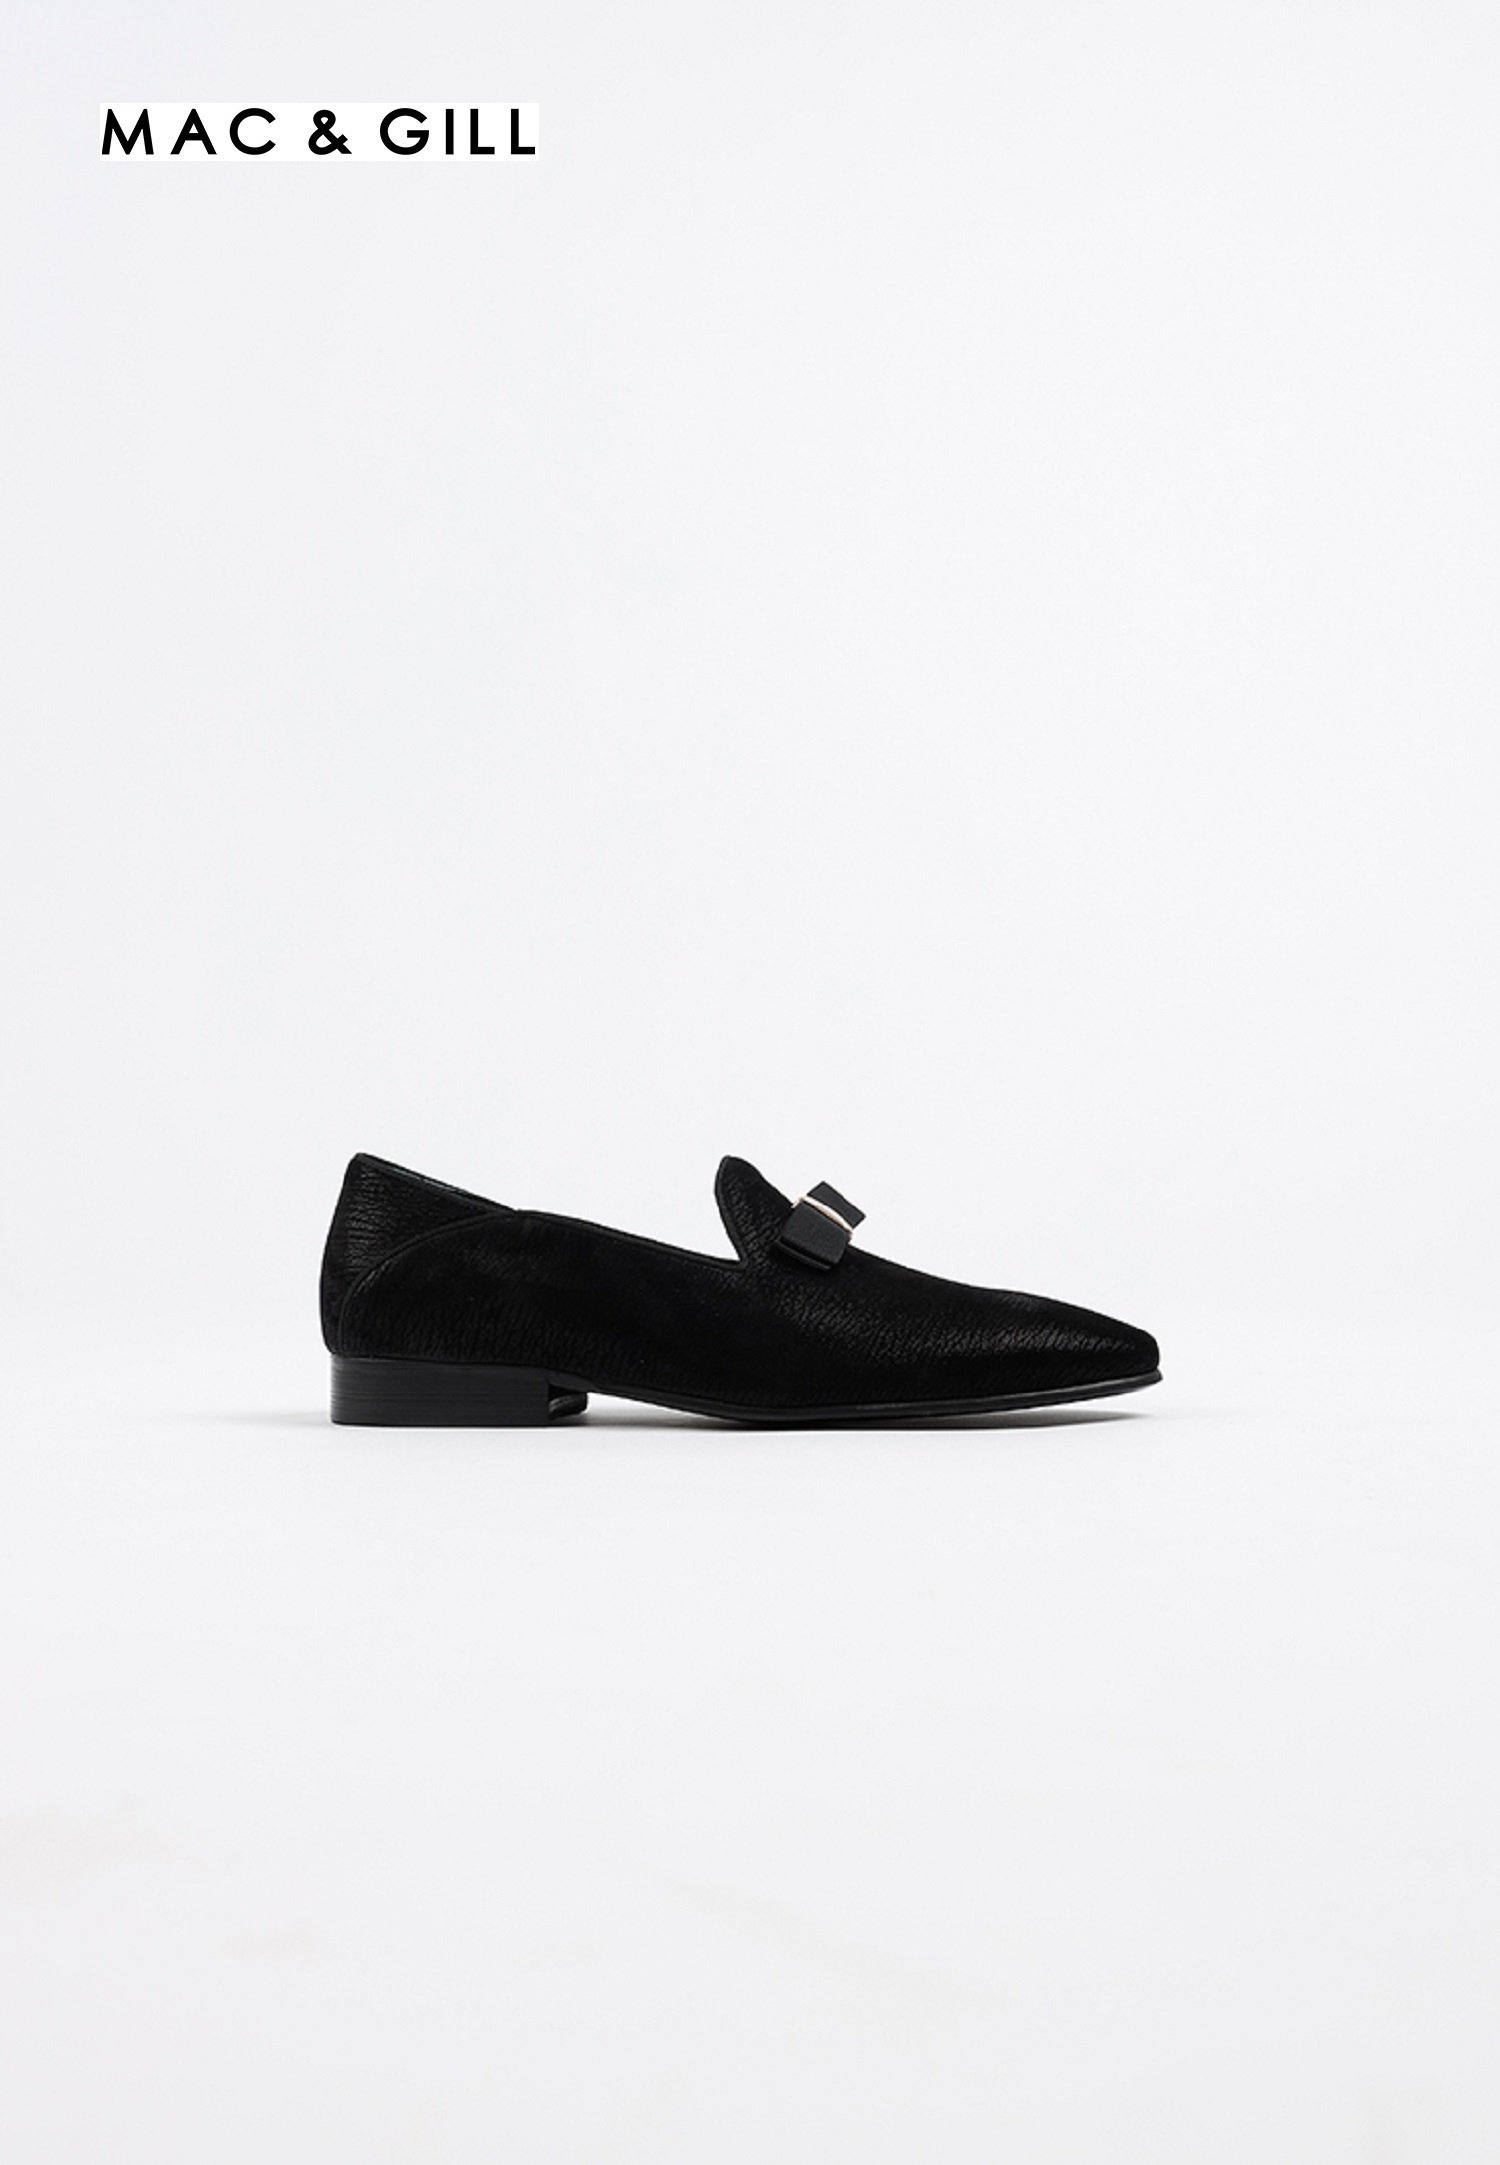 MAC&GILL Leather Black Slim Suede Loafer Genuine Leather